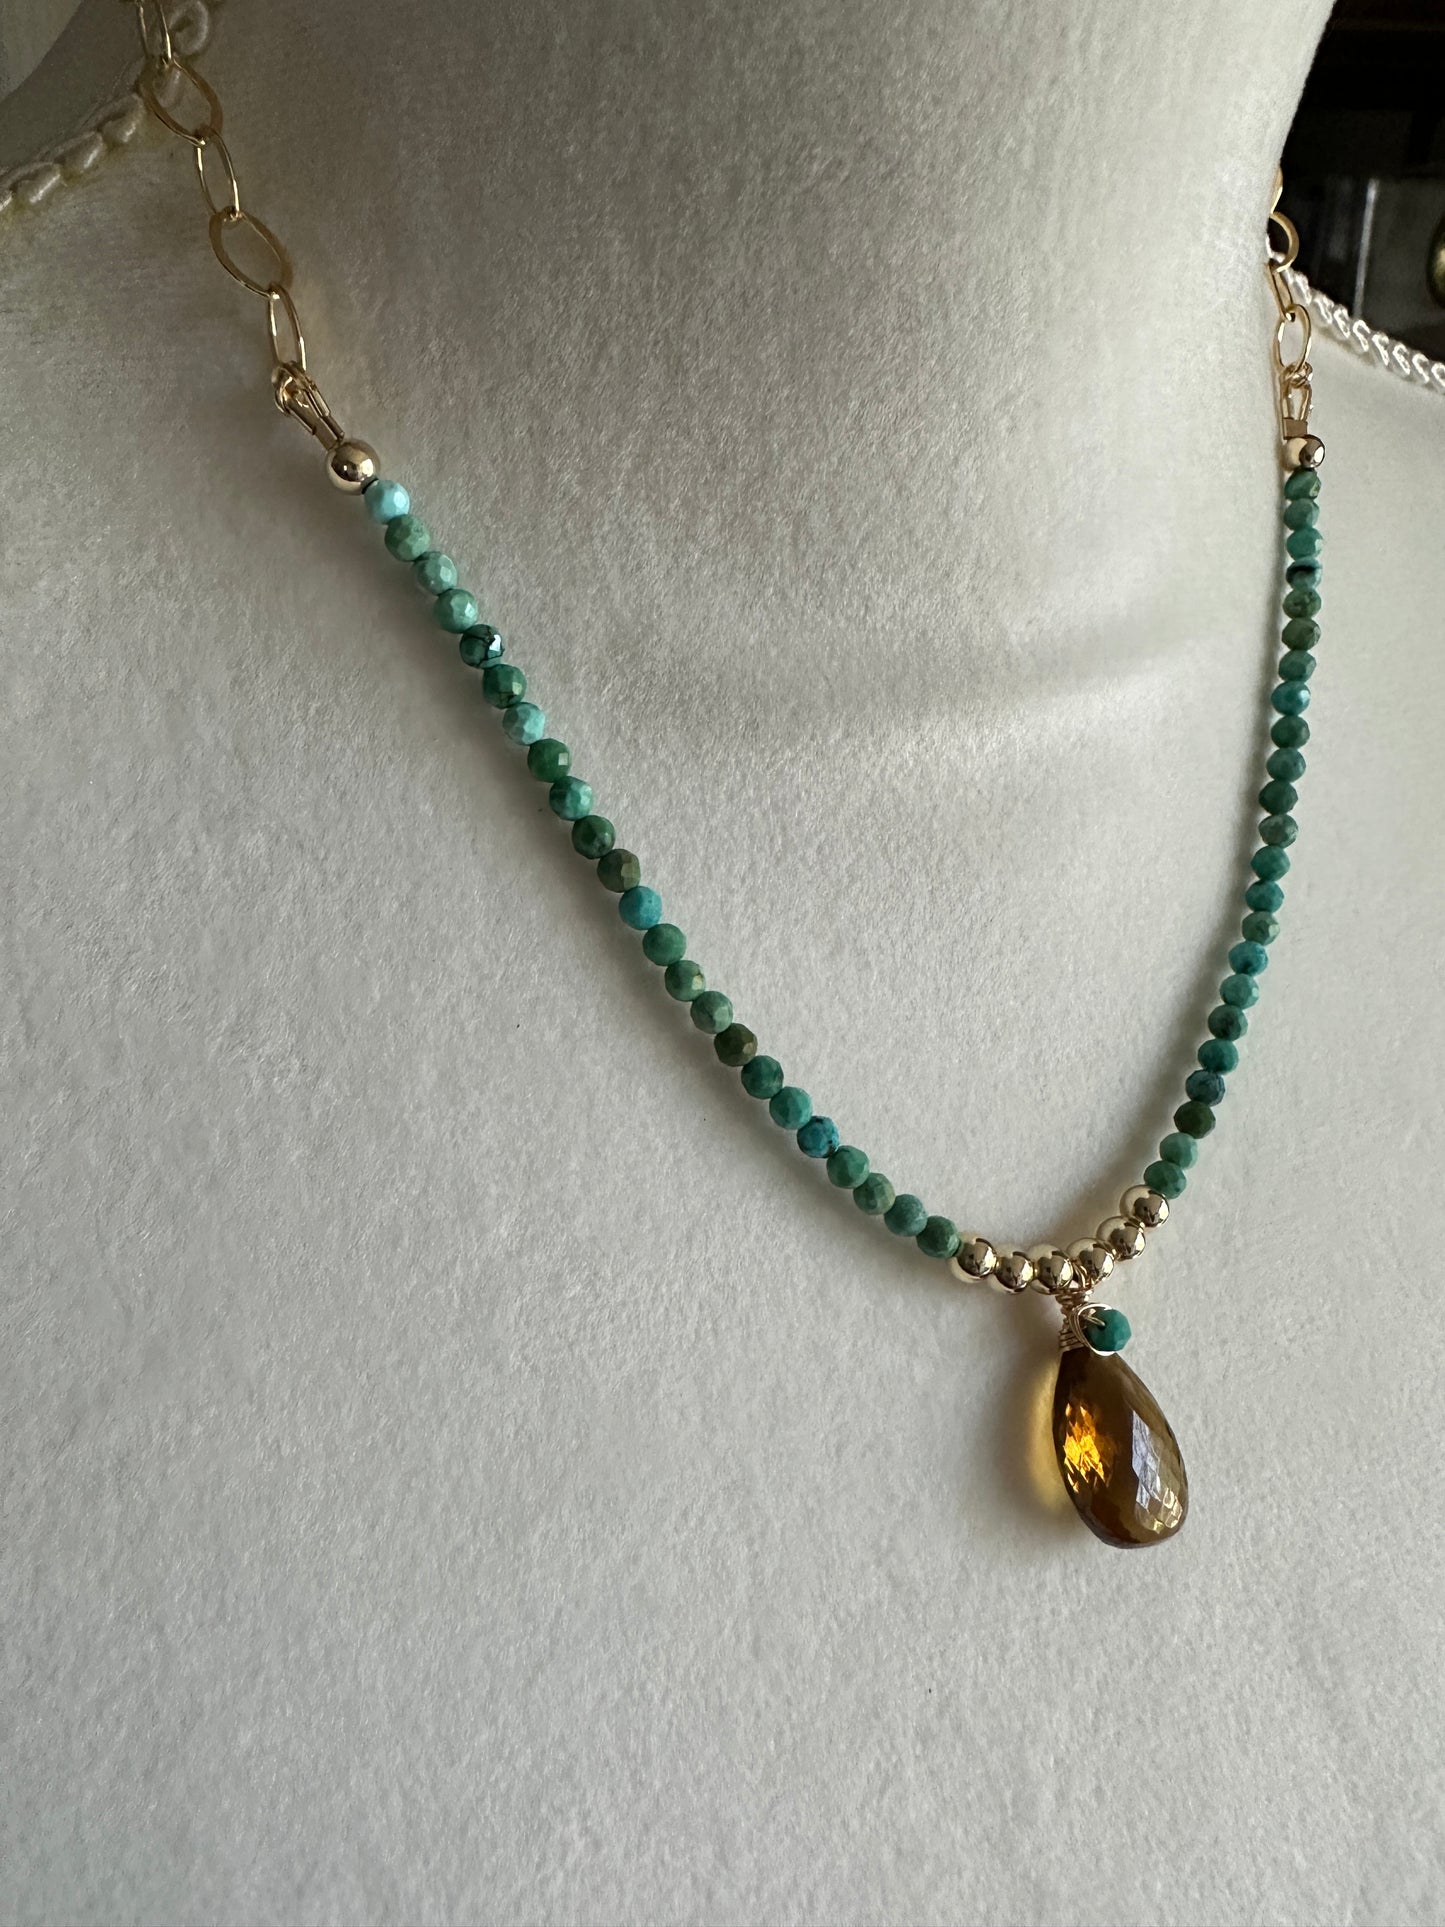 Turquoise and Whiskey Quartz Chain Necklace